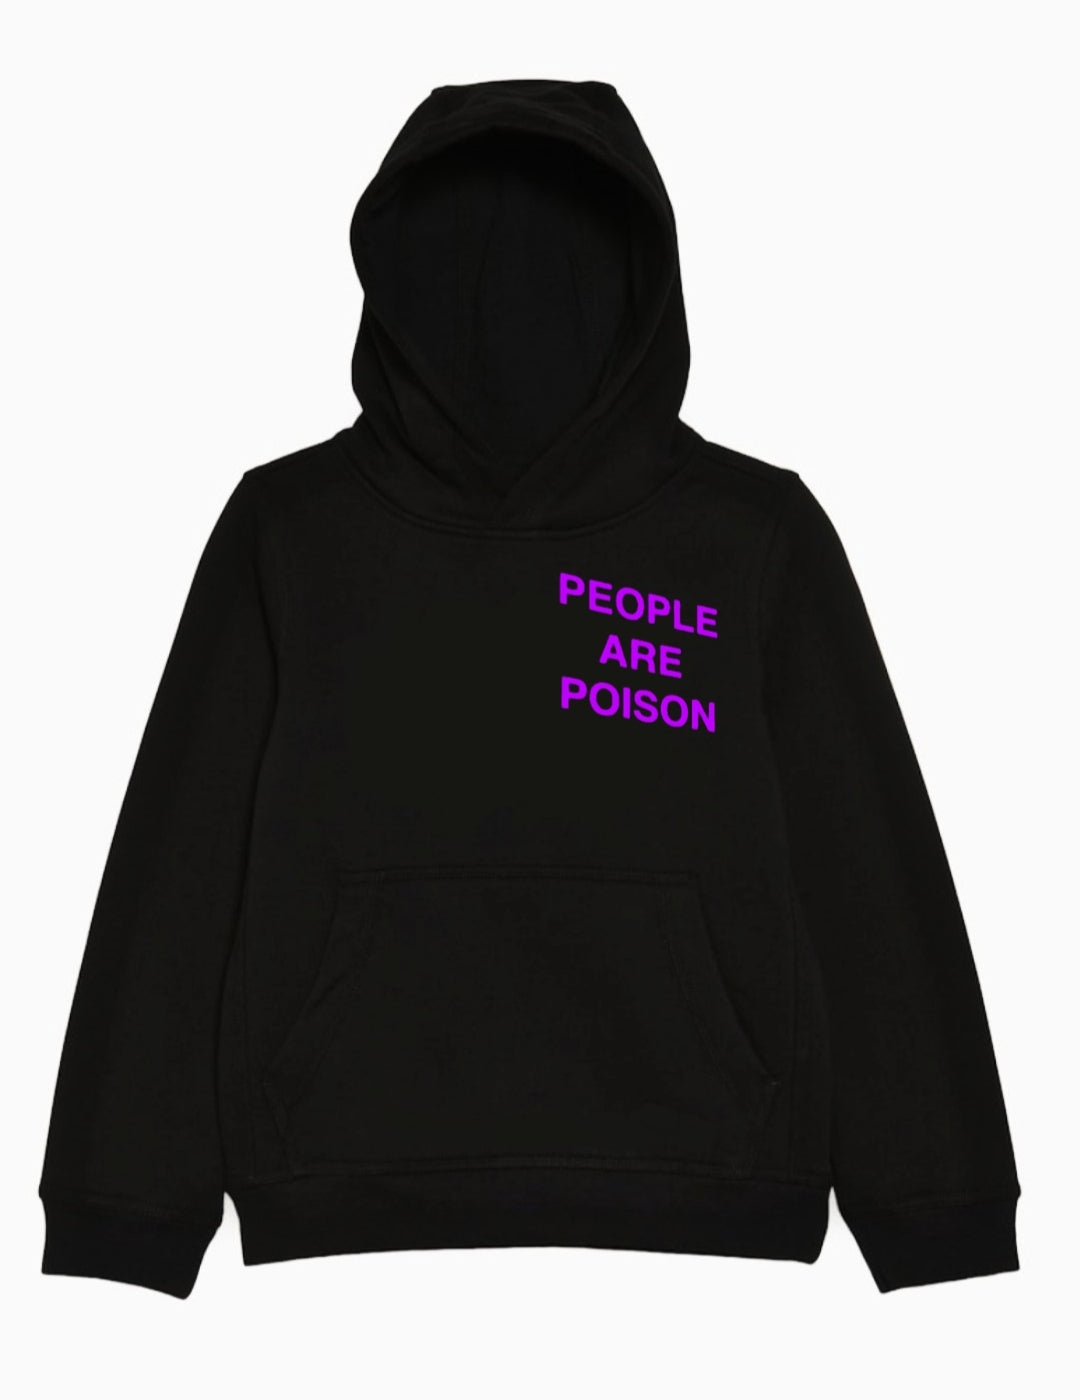 "PEOPLE ARE POISON" HOODIE